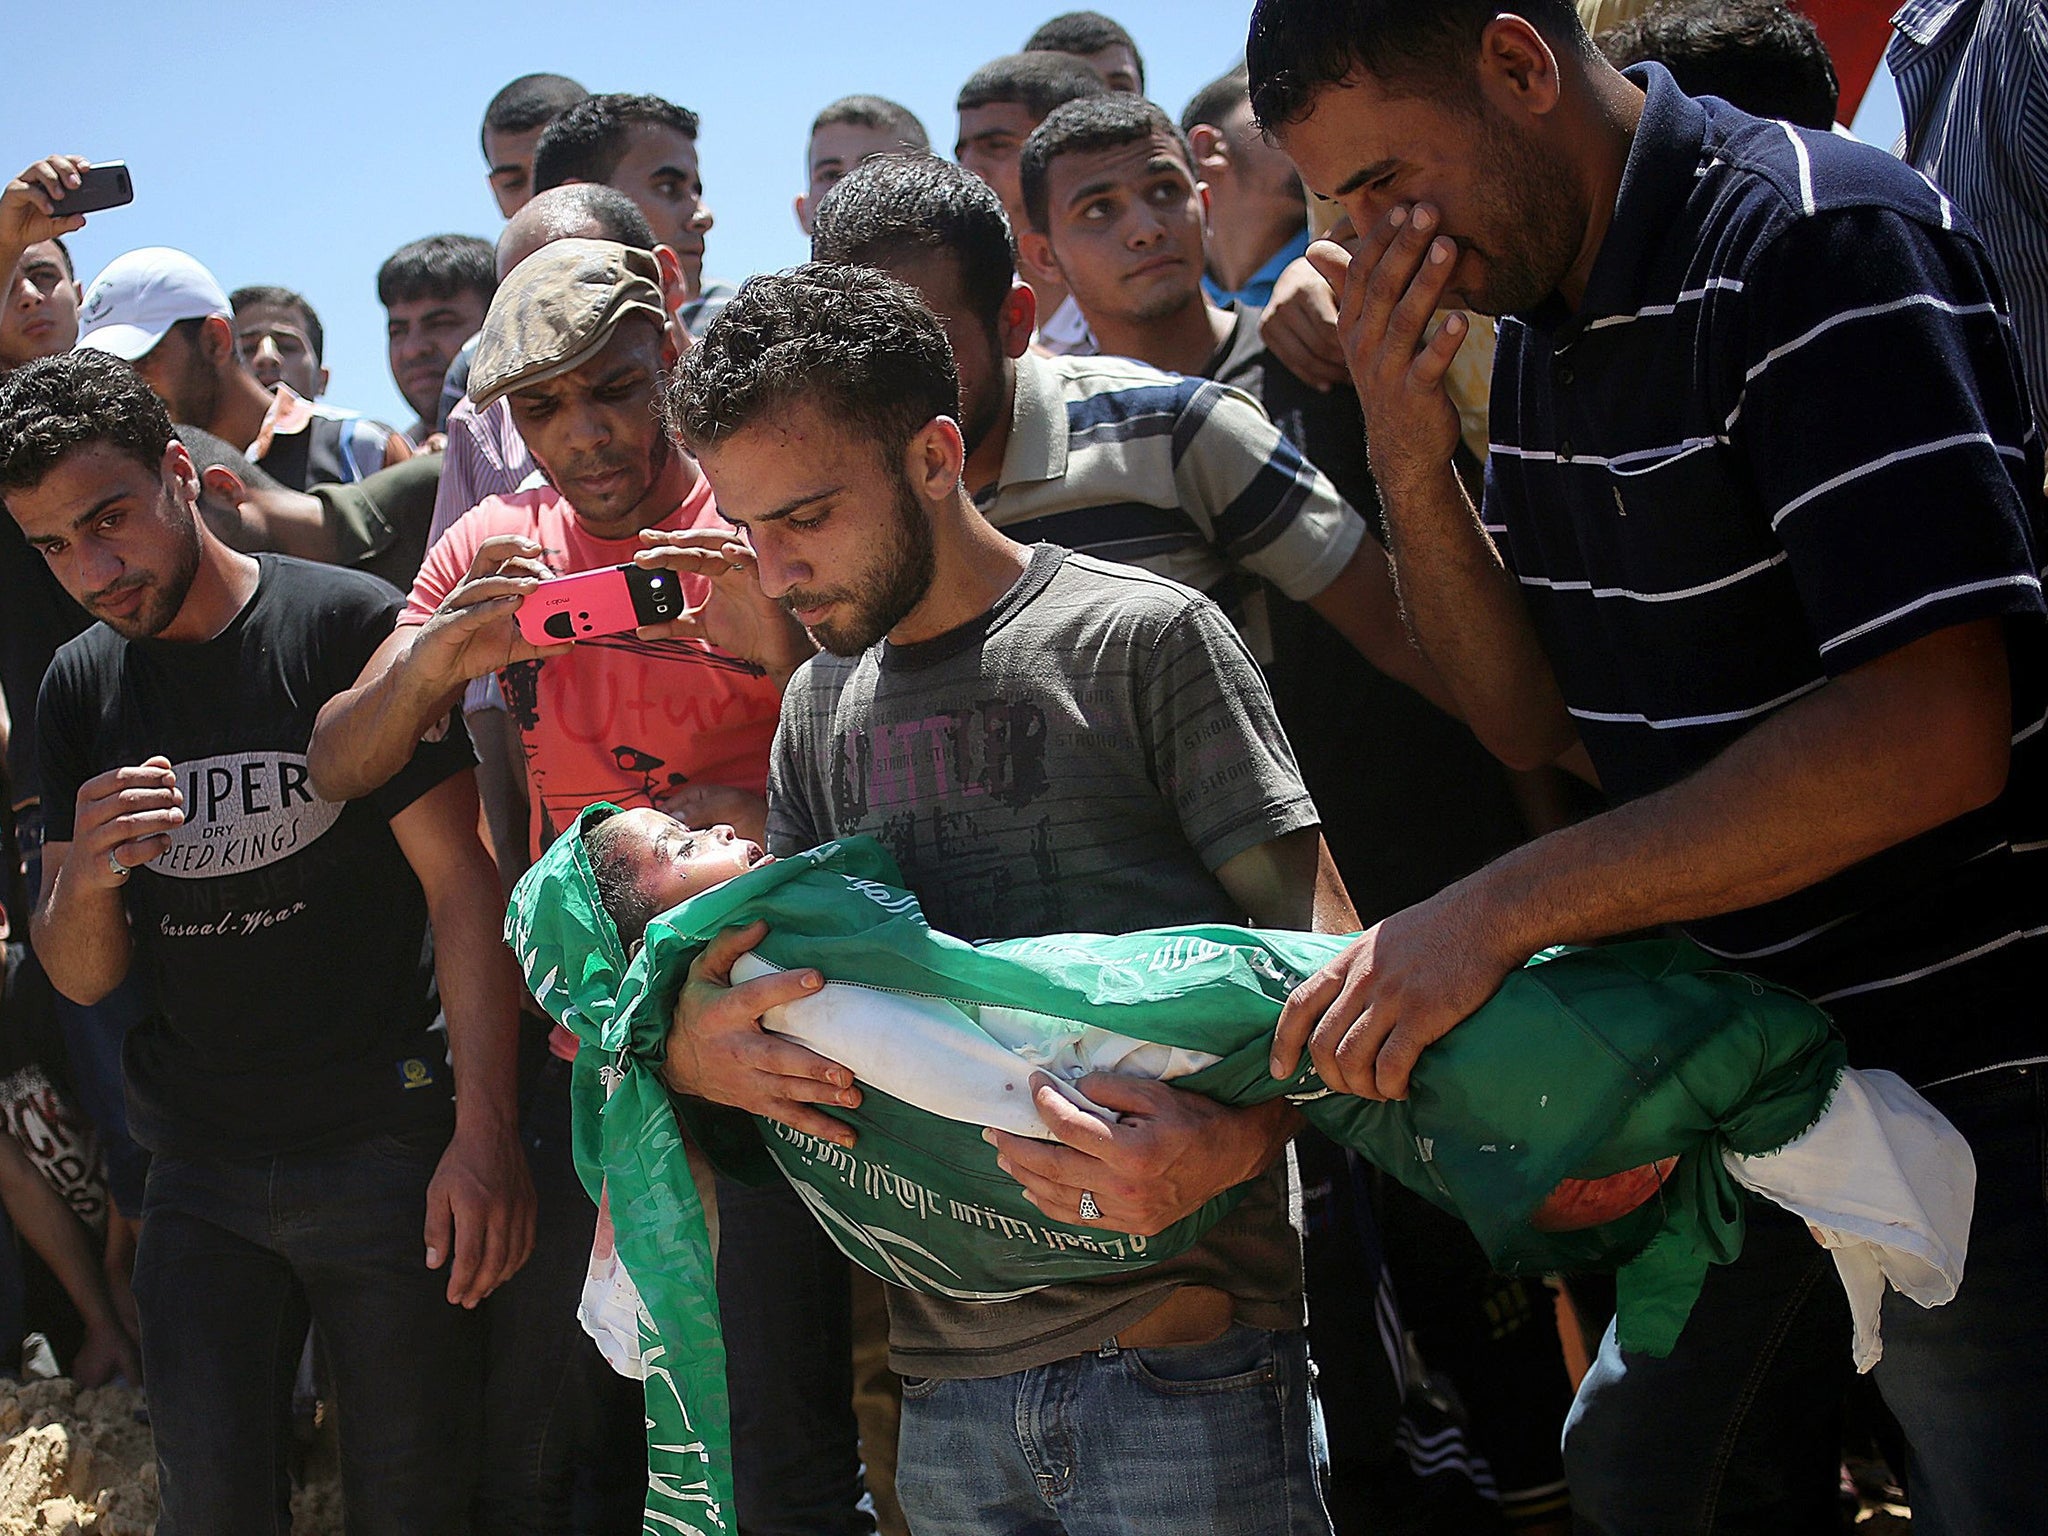 Palestinians carry the body of three-year-old Mohammed Mnassrah who was killed along with his parents and brother in an airstrike, during his funeral in Al Maghazi refugee camp in the eastern Gaza Strip